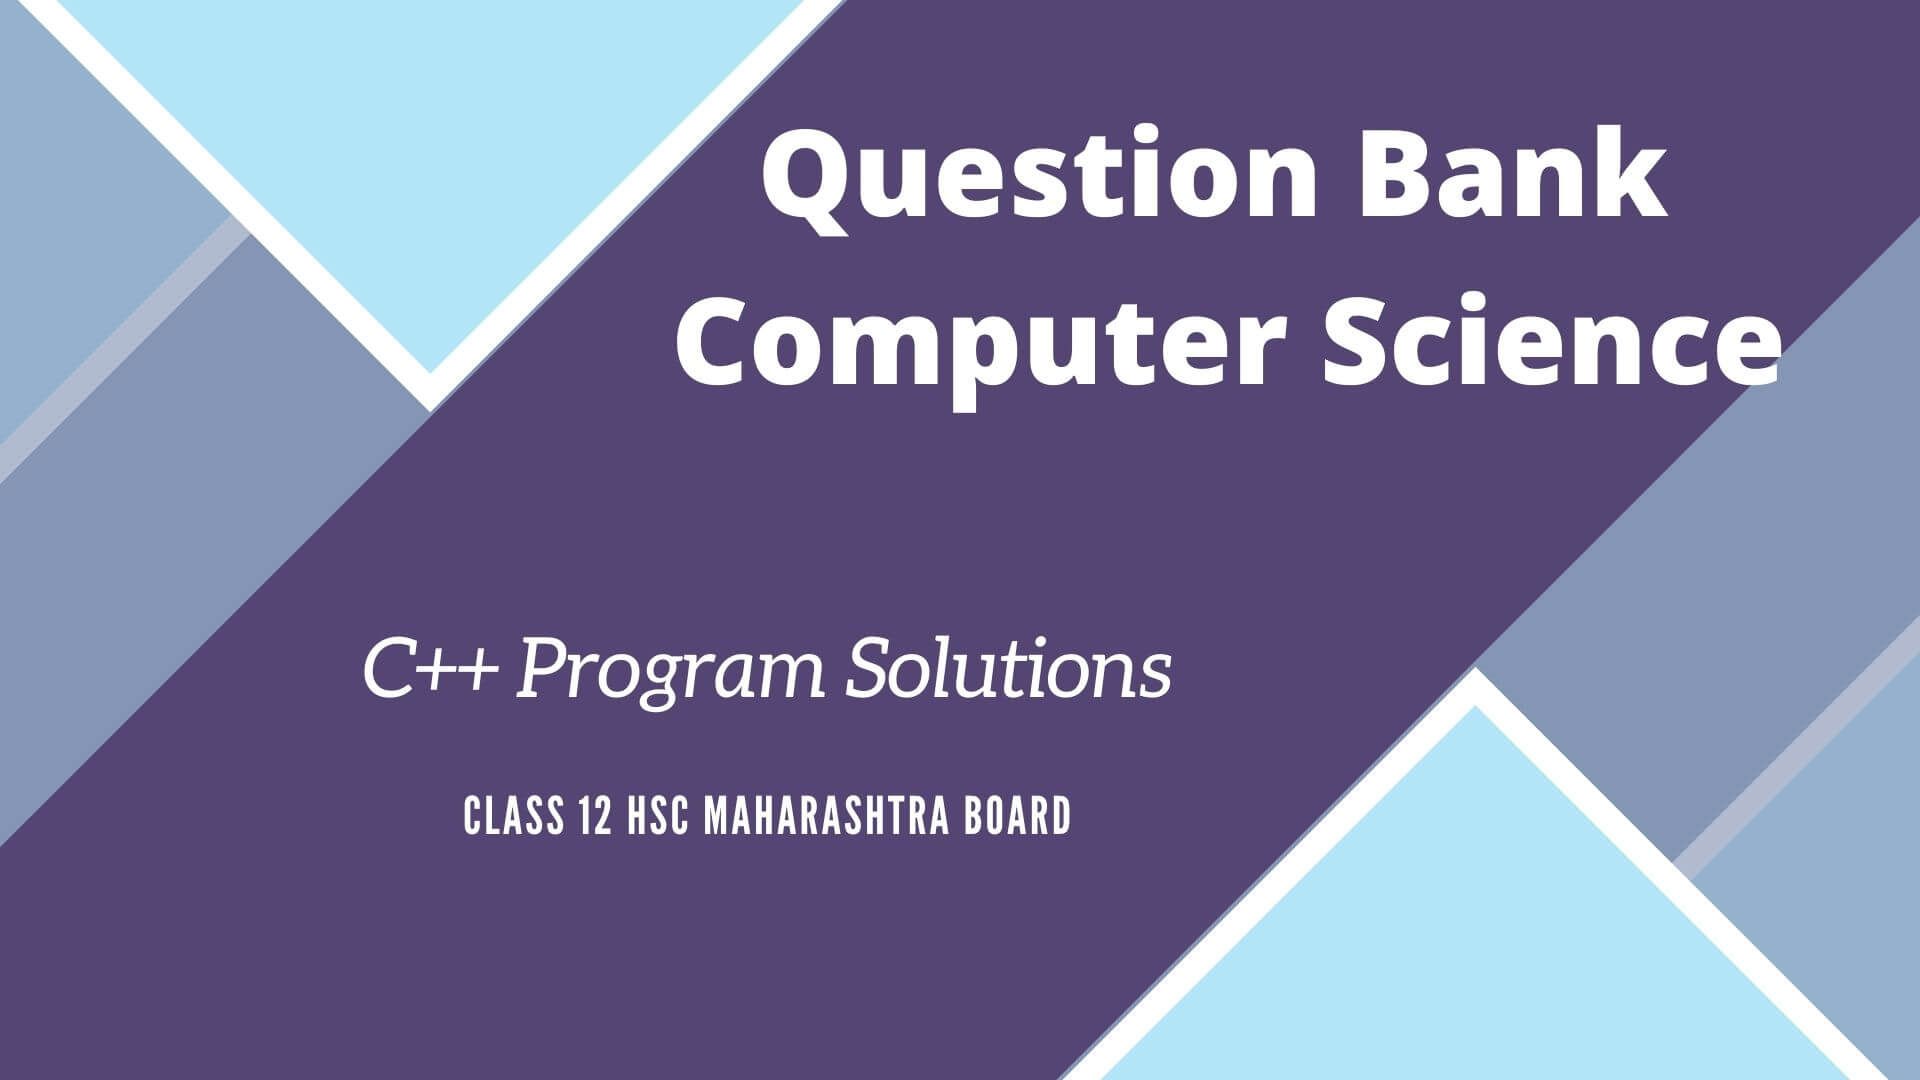 You are currently viewing QB C++ programs solutions class 12 Hsc Computer Science Maharashtra Board